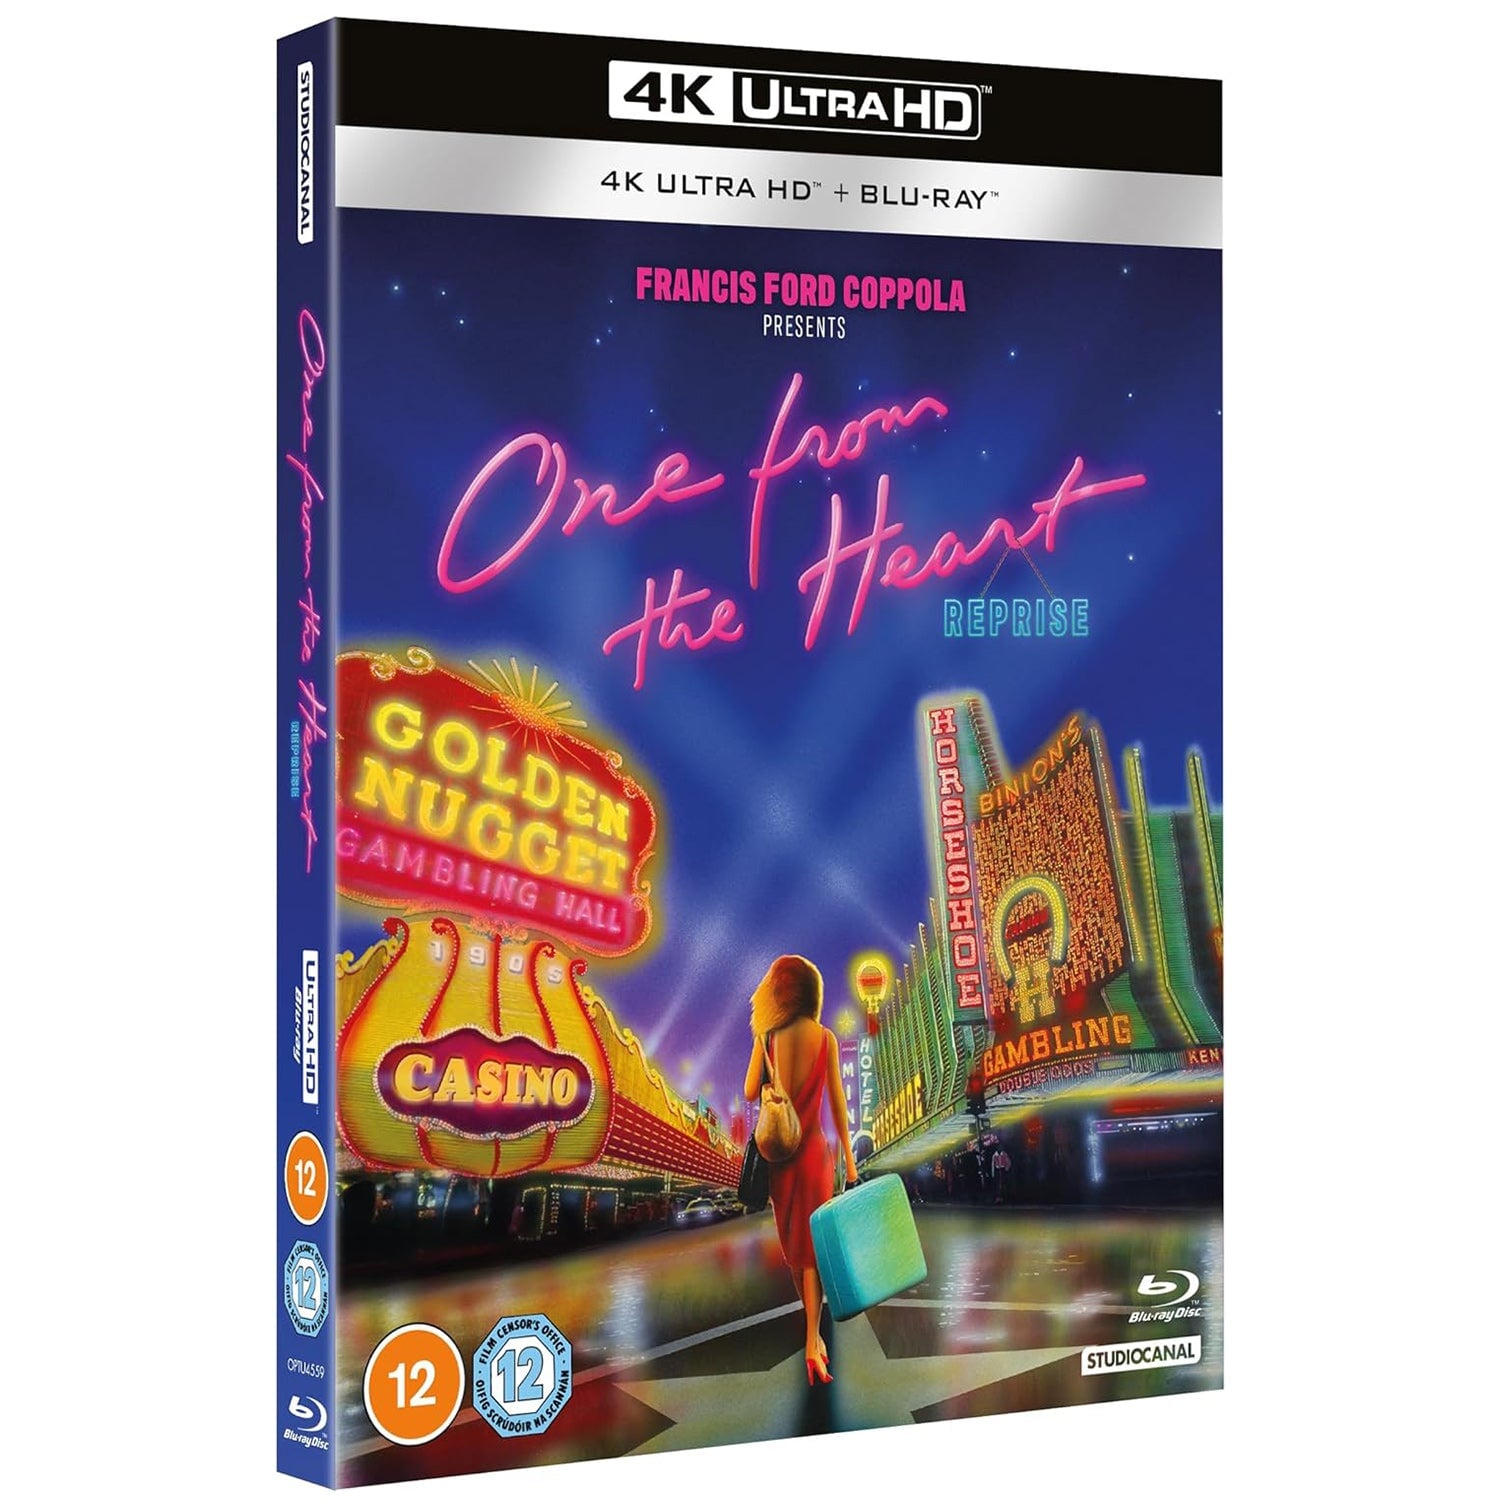 One from the Heart: Reprise (1982) (4K UHD + Blu-ray) – Bluraymania